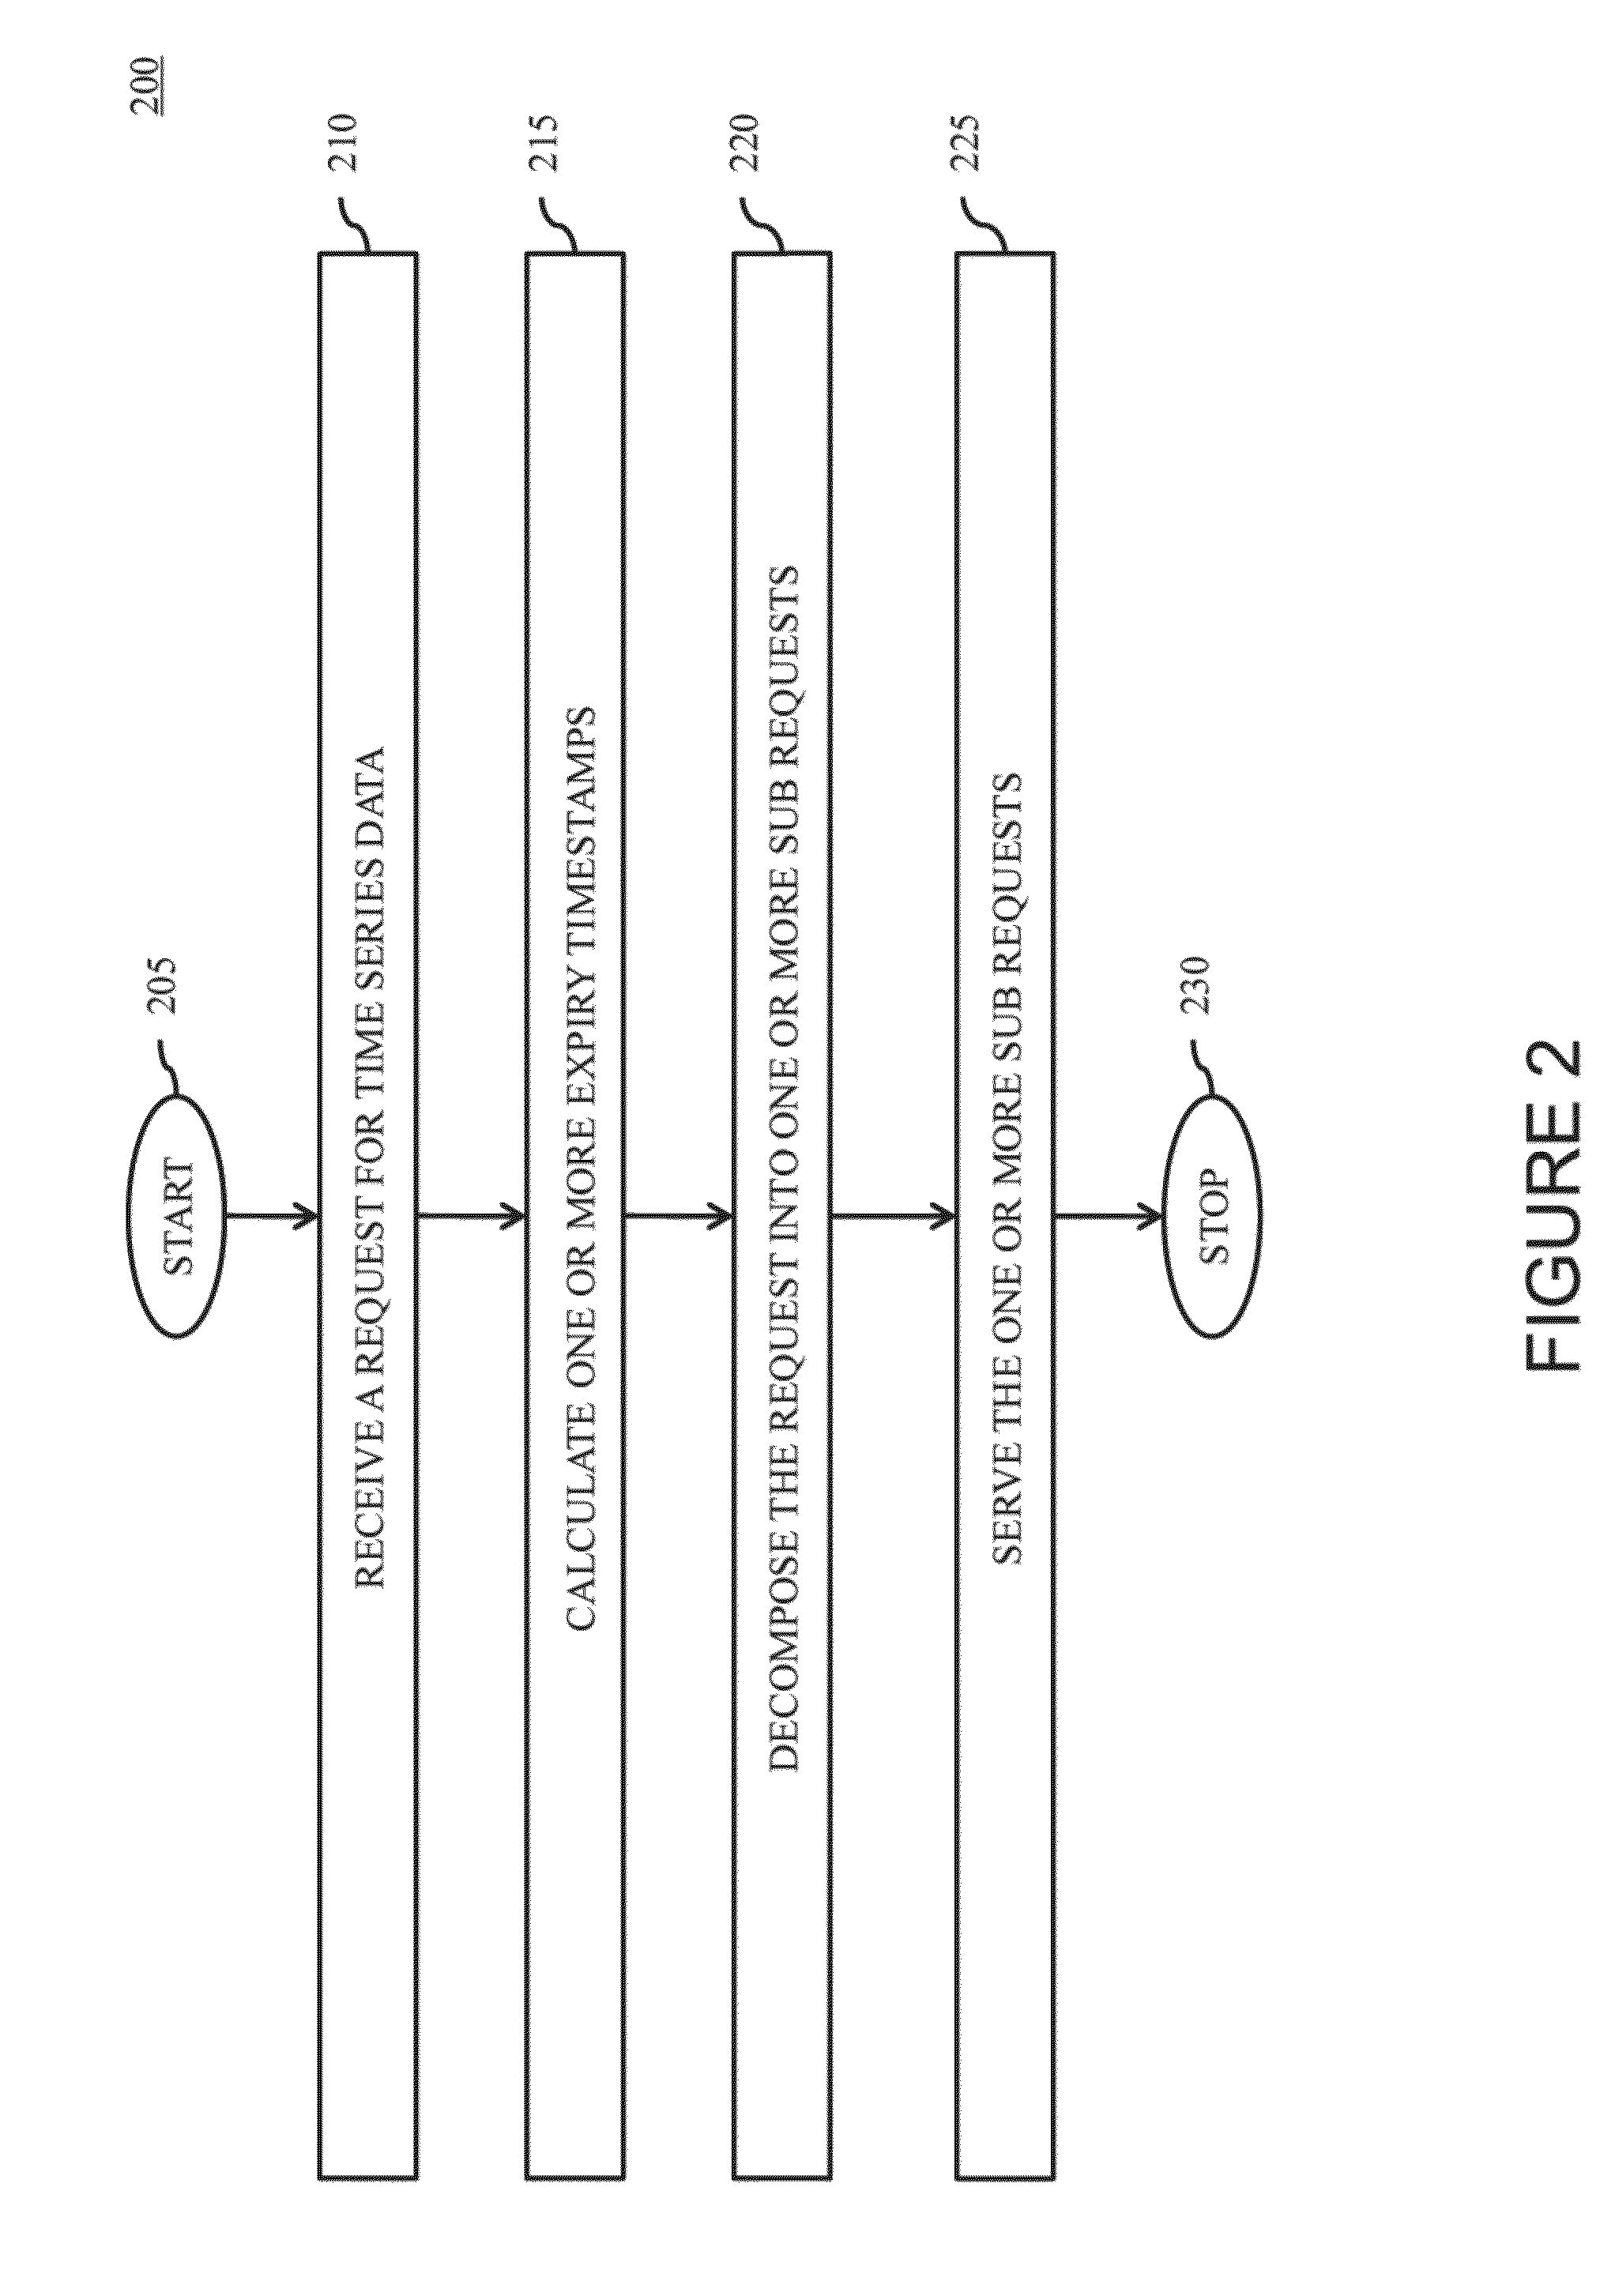 System and Method for Caching Time Series Data